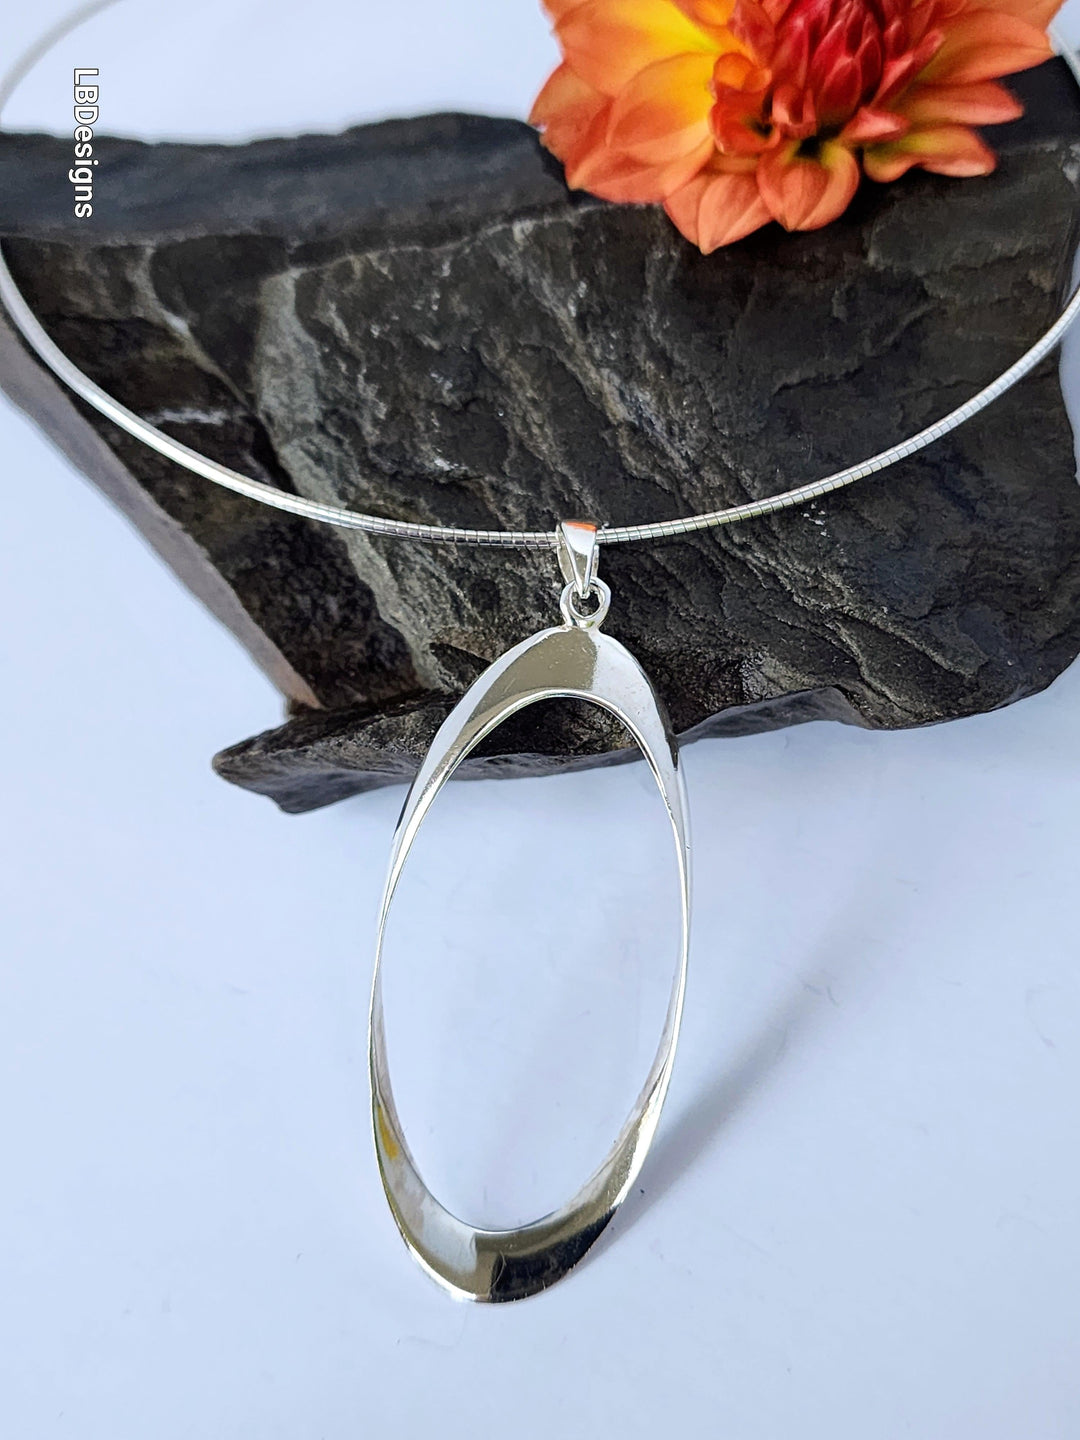 Silver oval pendant on a snake chain - LB Designs